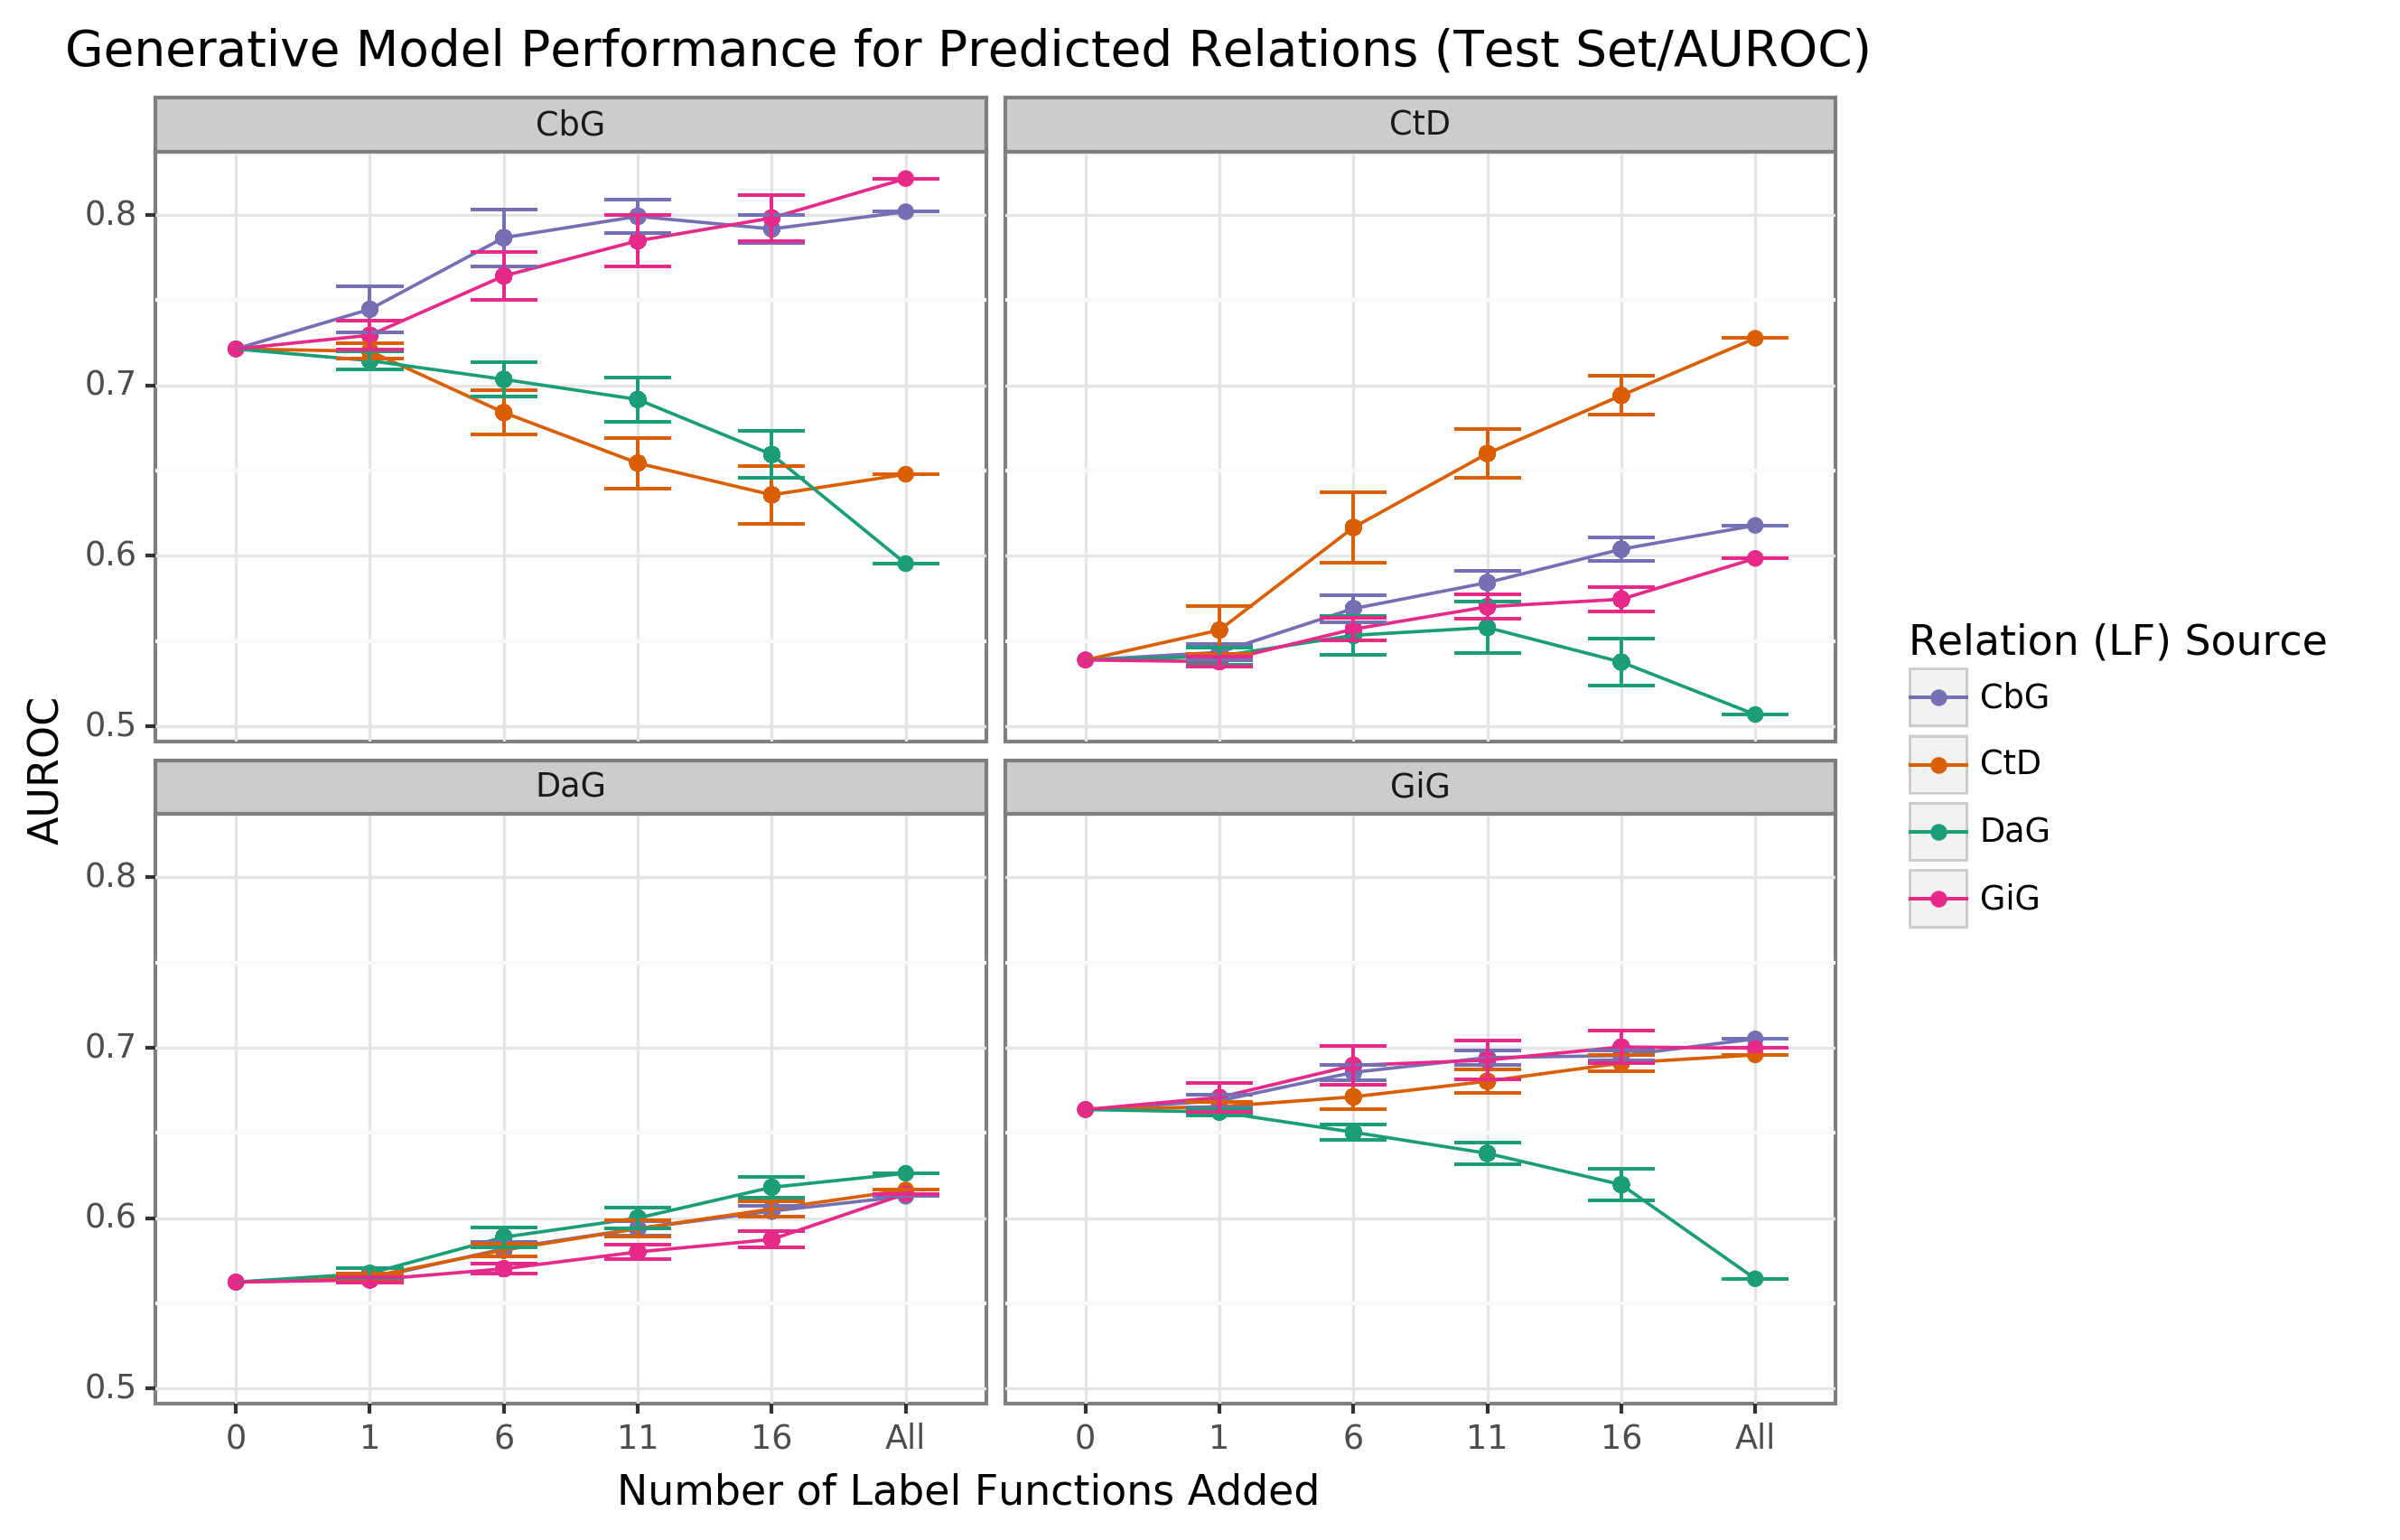 Figure 2: Edge-specific label functions perform better than edge-mismatch label functions, but certain mismatch situations show signs of successful transfer. Each line plot header depicts the edge type the generative model is trying to predict, while the colors represent the source of label functions. For example, orange represents sampling label functions designed to predict the Compound-treats-Disease (CtD) edge type. The x-axis shows the number of randomly sampled label functions incorporated as an addition to the database-only baseline model (the point at 0). The y-axis shows the area under the receiver operating curve (AUROC). Each point on the plot shows the average of 50 sample runs, while the error bars show the 95% confidence intervals of all runs. The baseline and “All” data points consist of sampling from the entire fixed set of label functions.